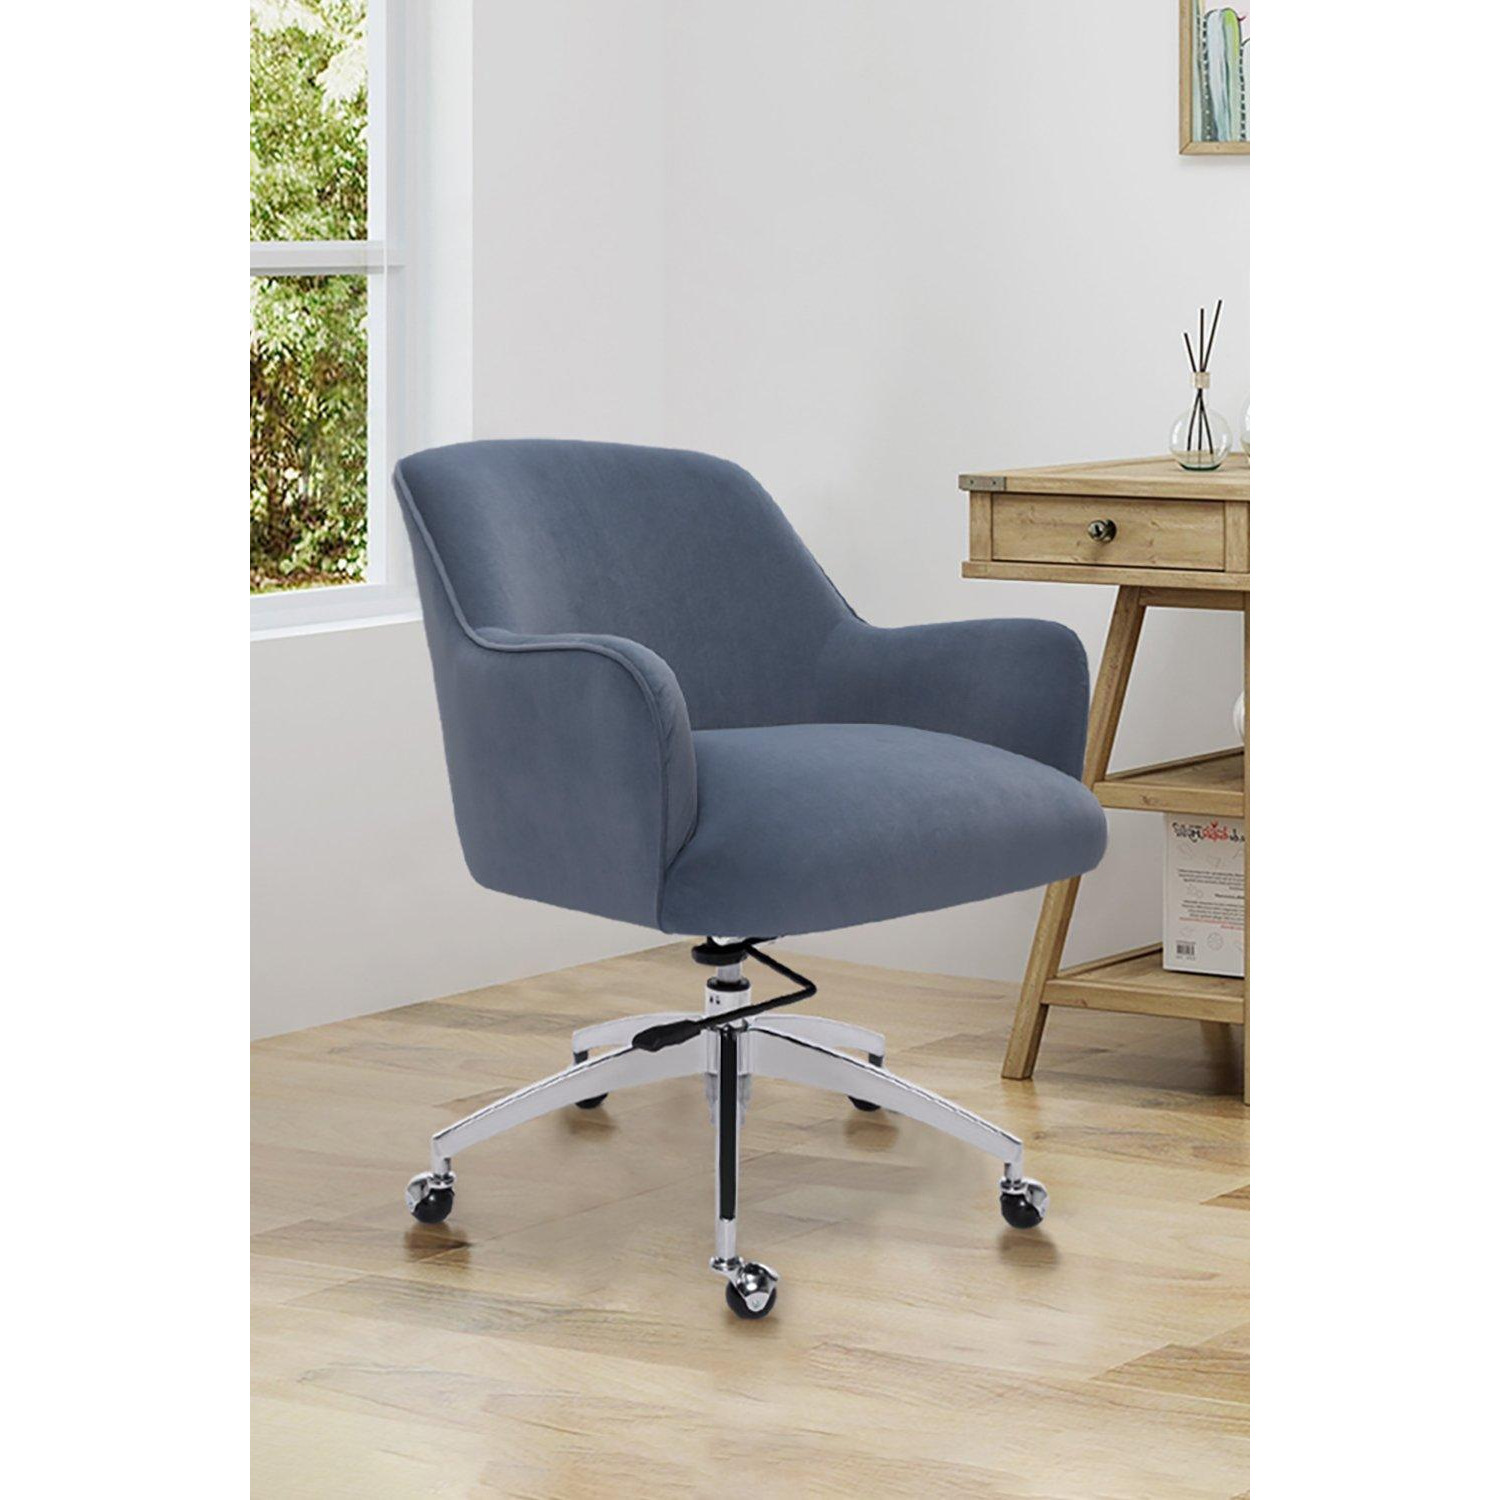 Office Home Chair Computer Desk Chair Swivel Adjustable Lift - image 1